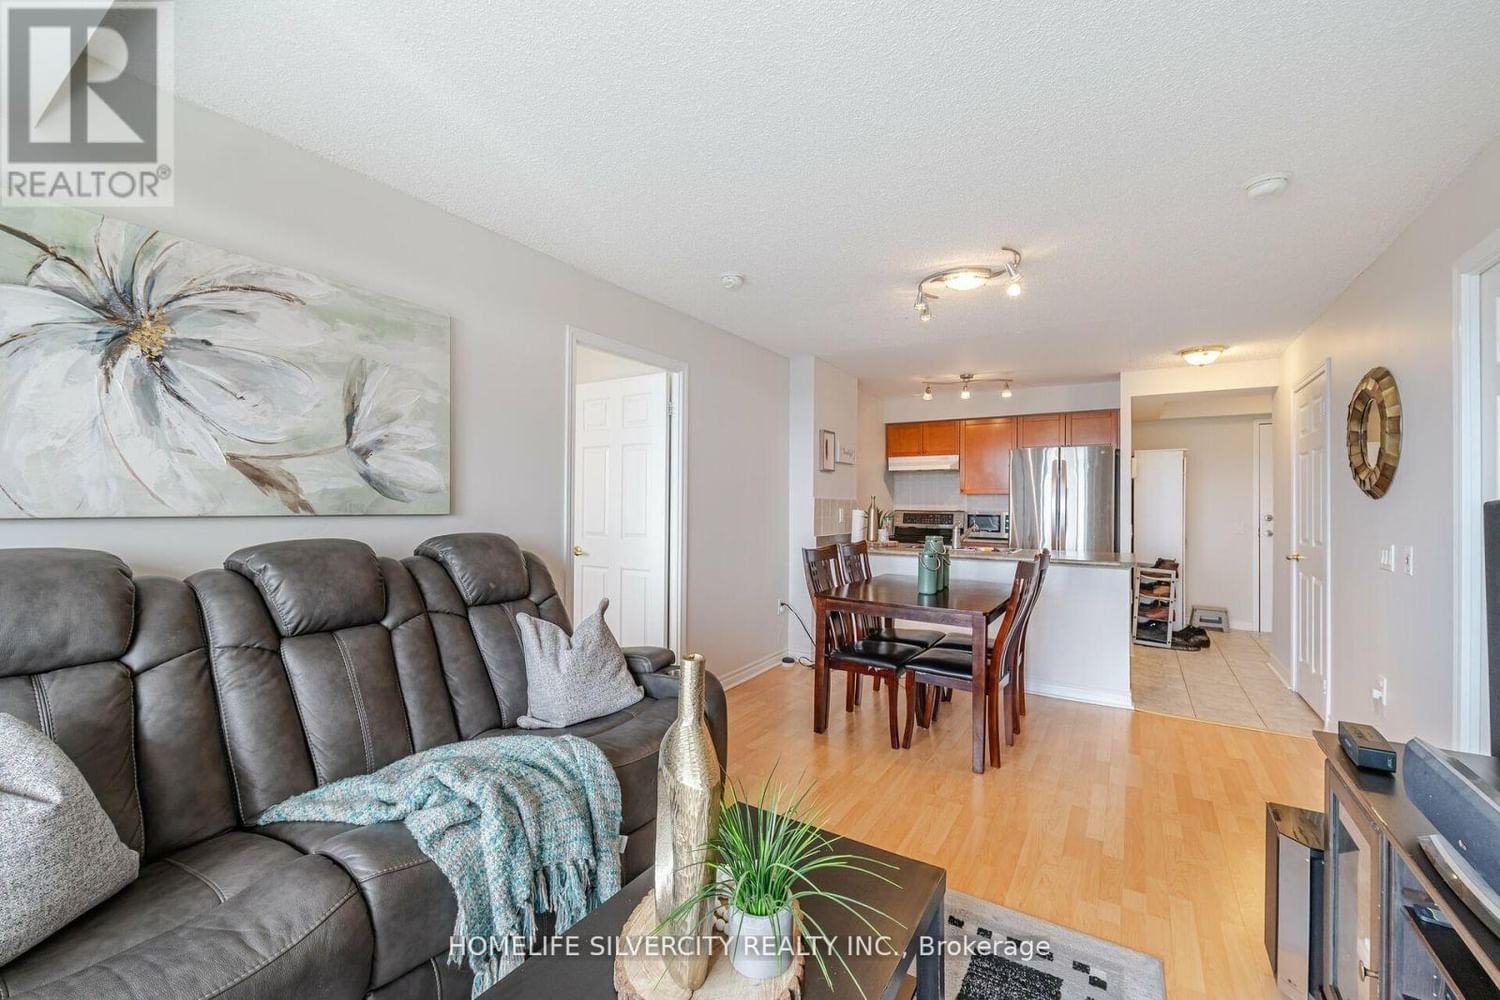 1210 - 55 STRATHAVEN DRIVE Image 11